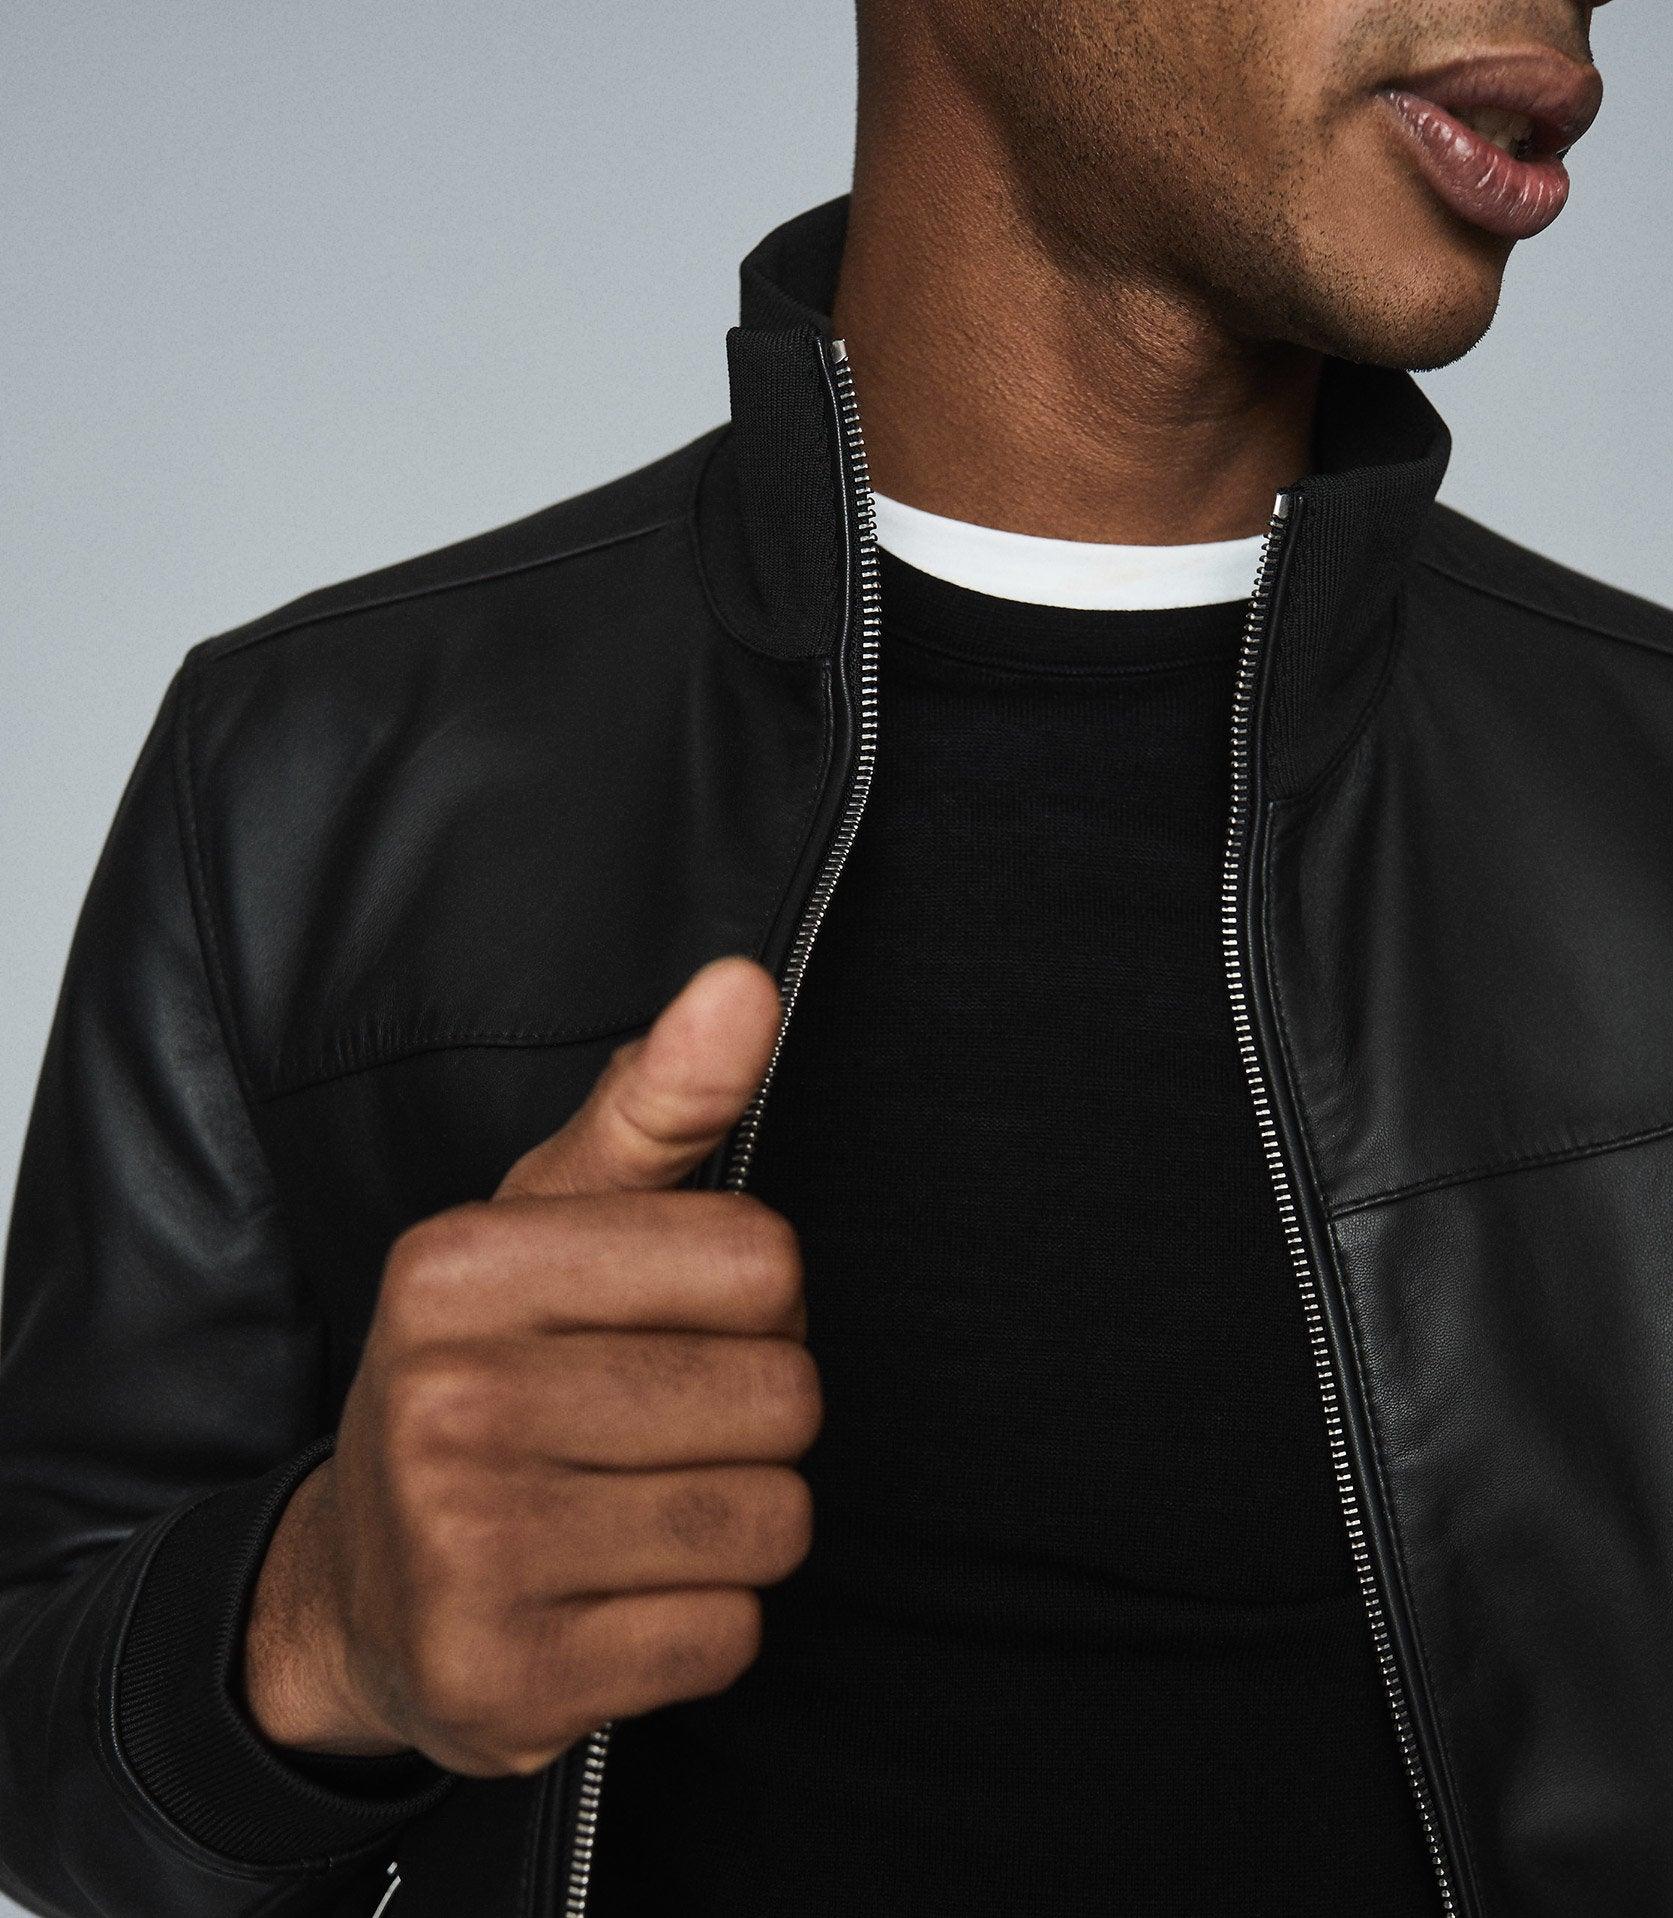 Reiss Mineral - Leather Bomber Jacket in Black for Men | Lyst